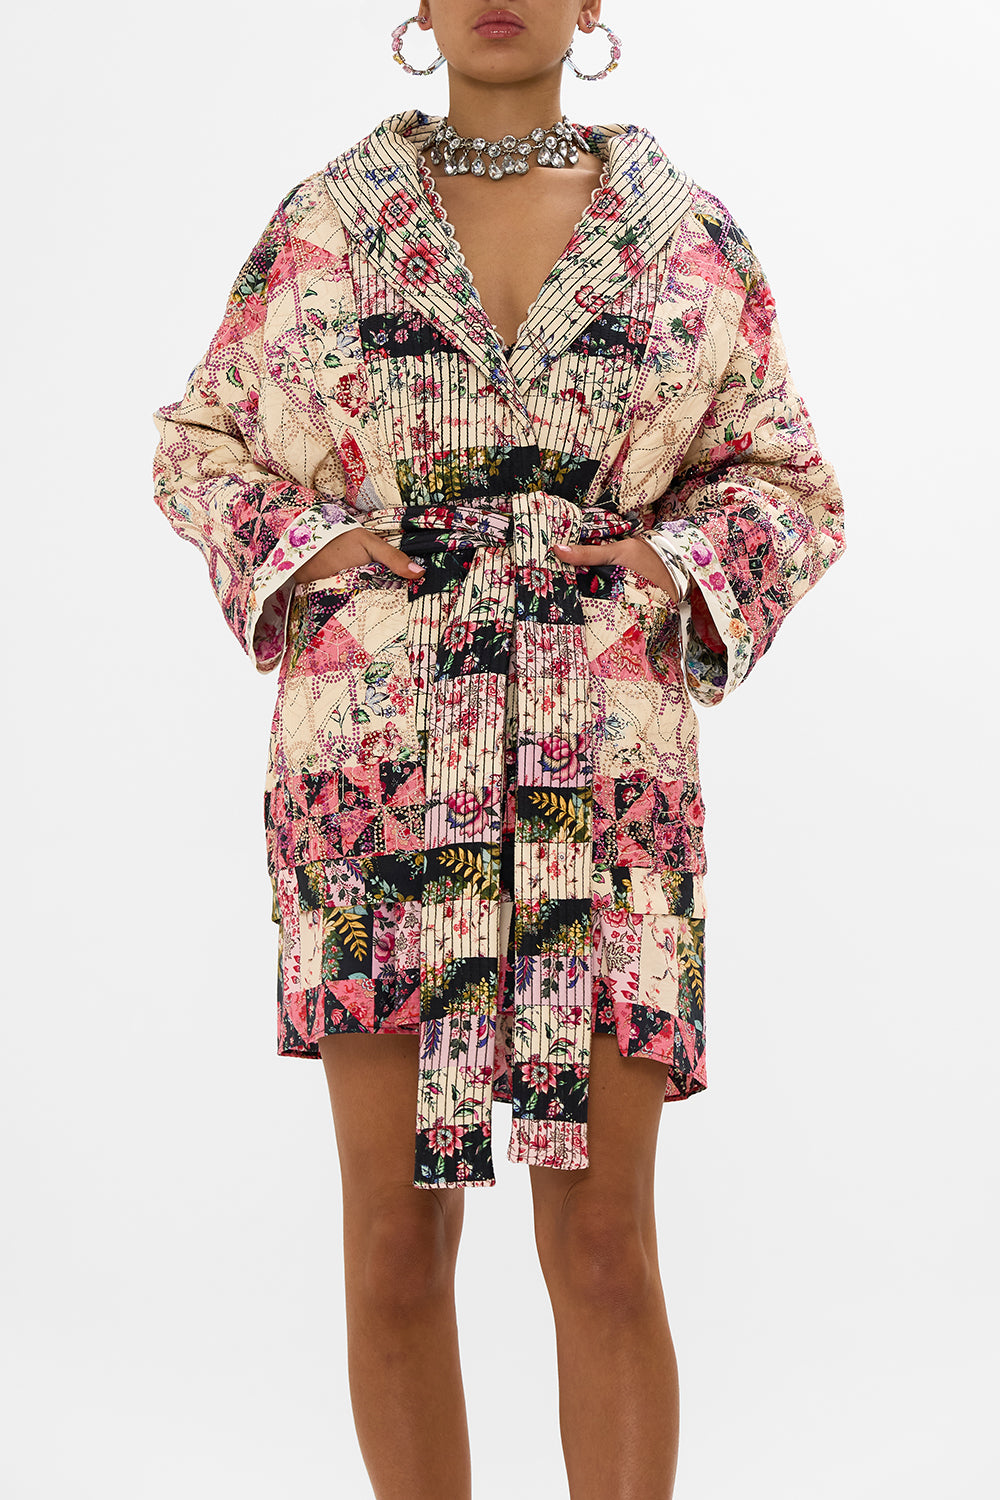 REVERSIBLE QUILTED COAT PATCHWORK POETRY